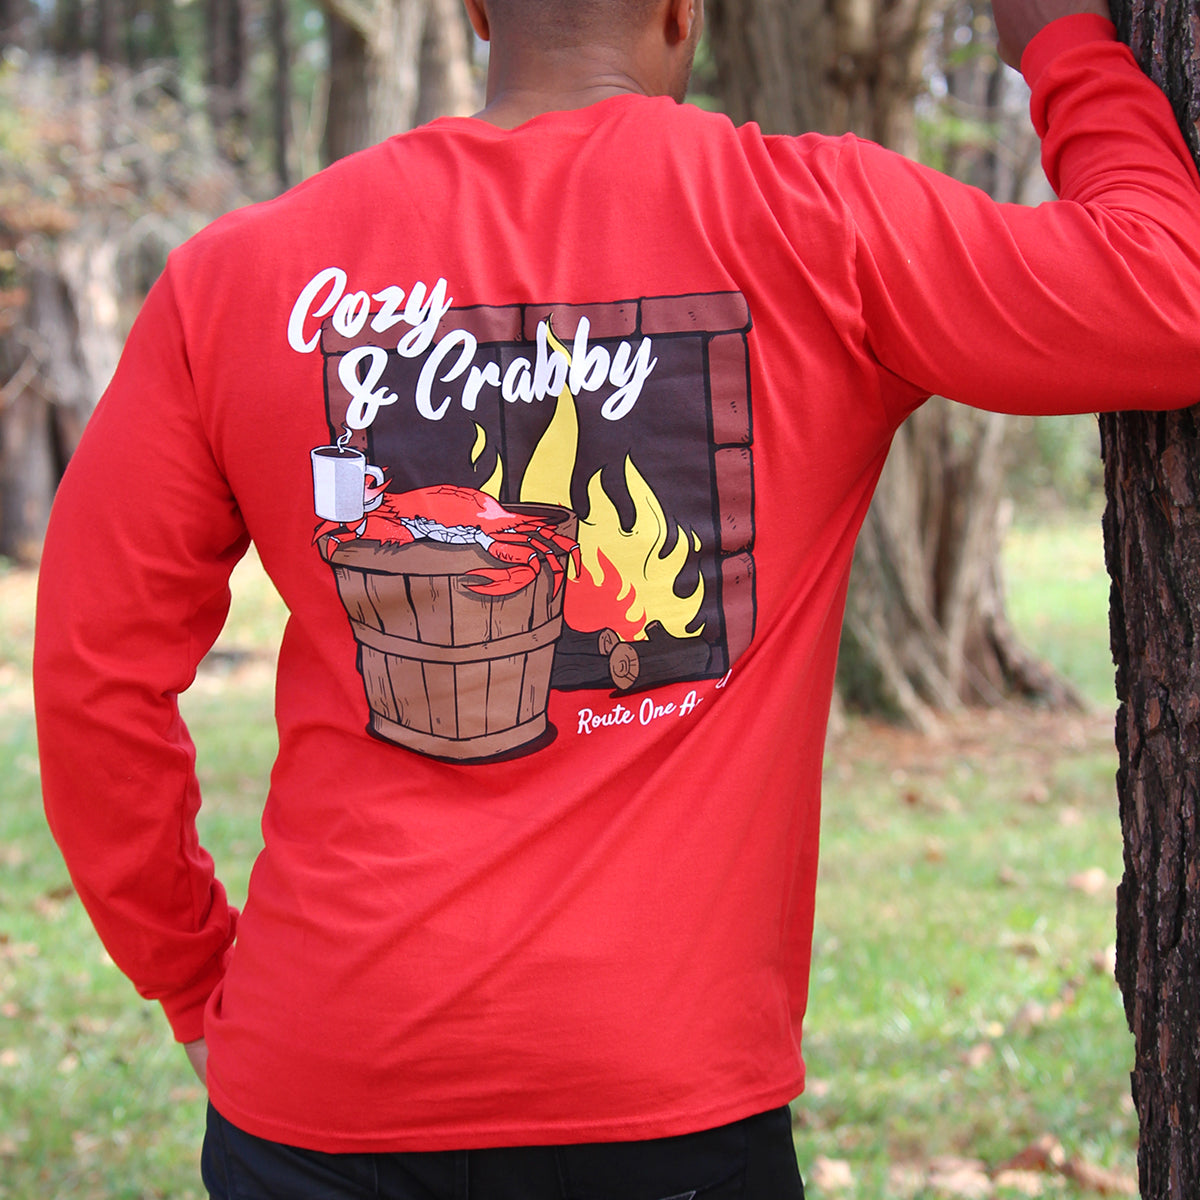 Cozy & Crabby (Red) / Long Sleeve Shirt - Route One Apparel